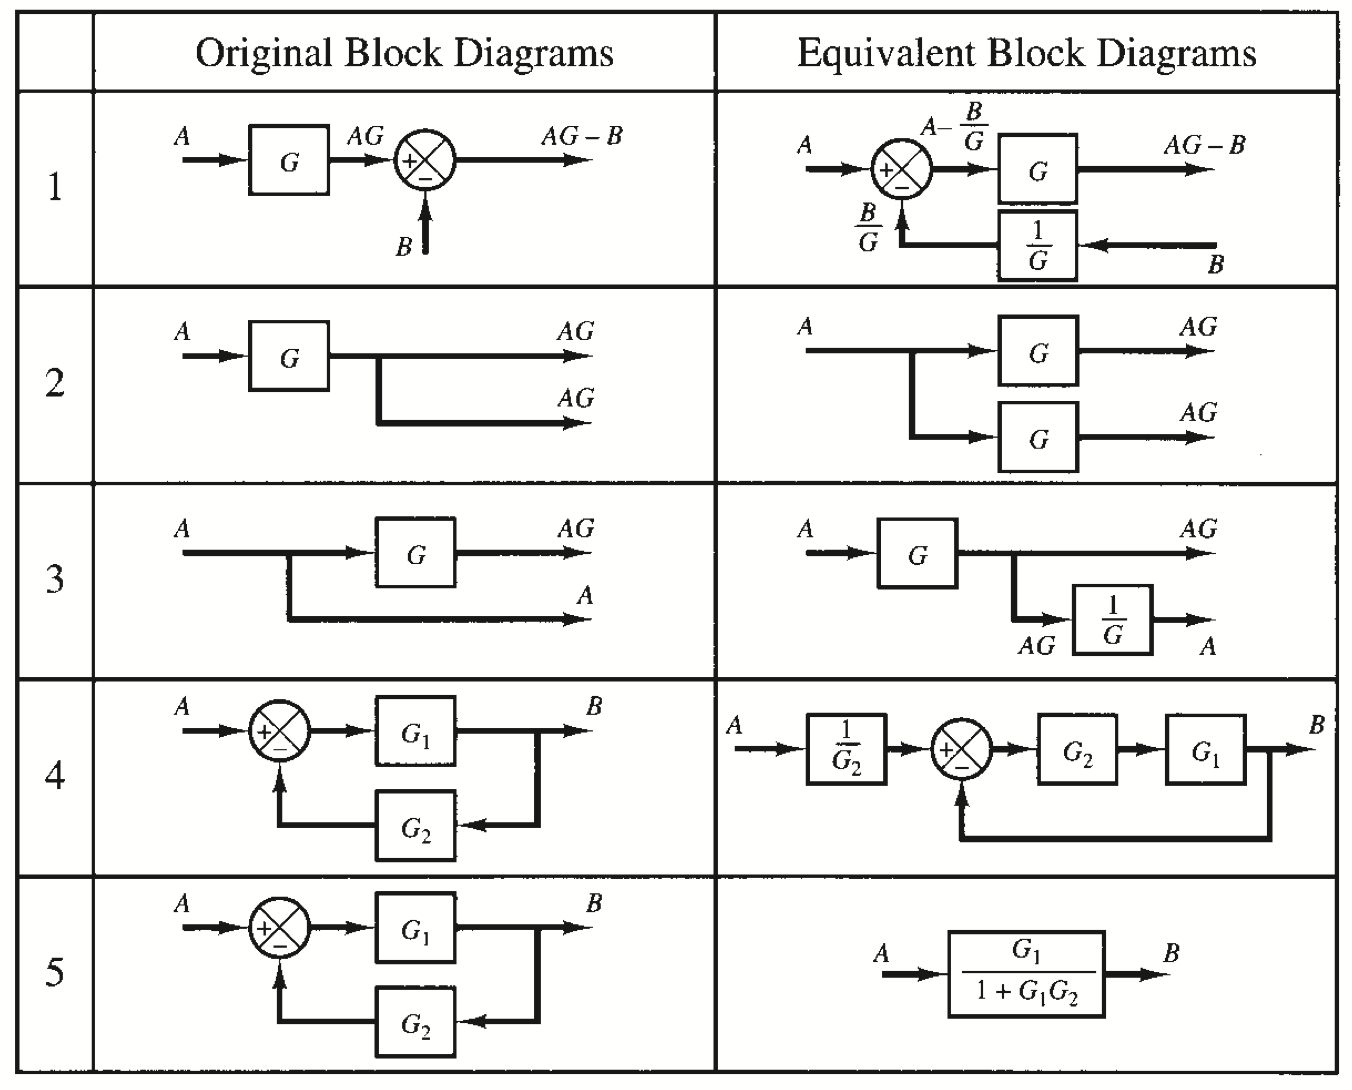 09_Models_of_Control_Devices_and_Systems_Rules_For_Diagram_Manipulation